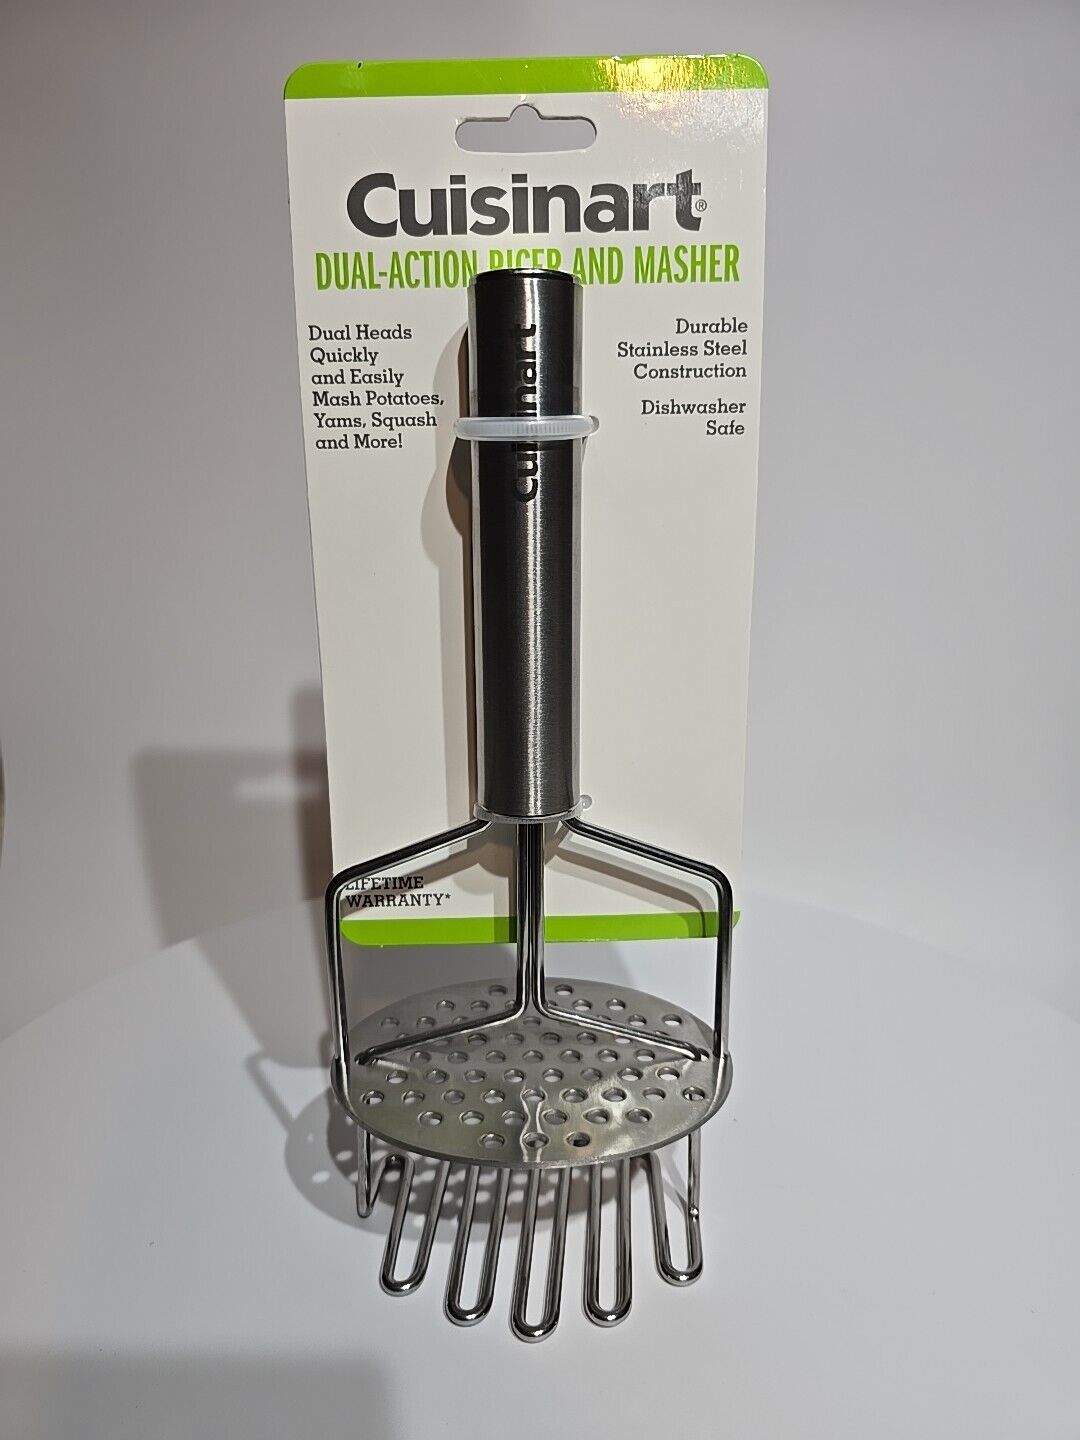 Cuisinart Dual Action Ricer And Masher Stainless